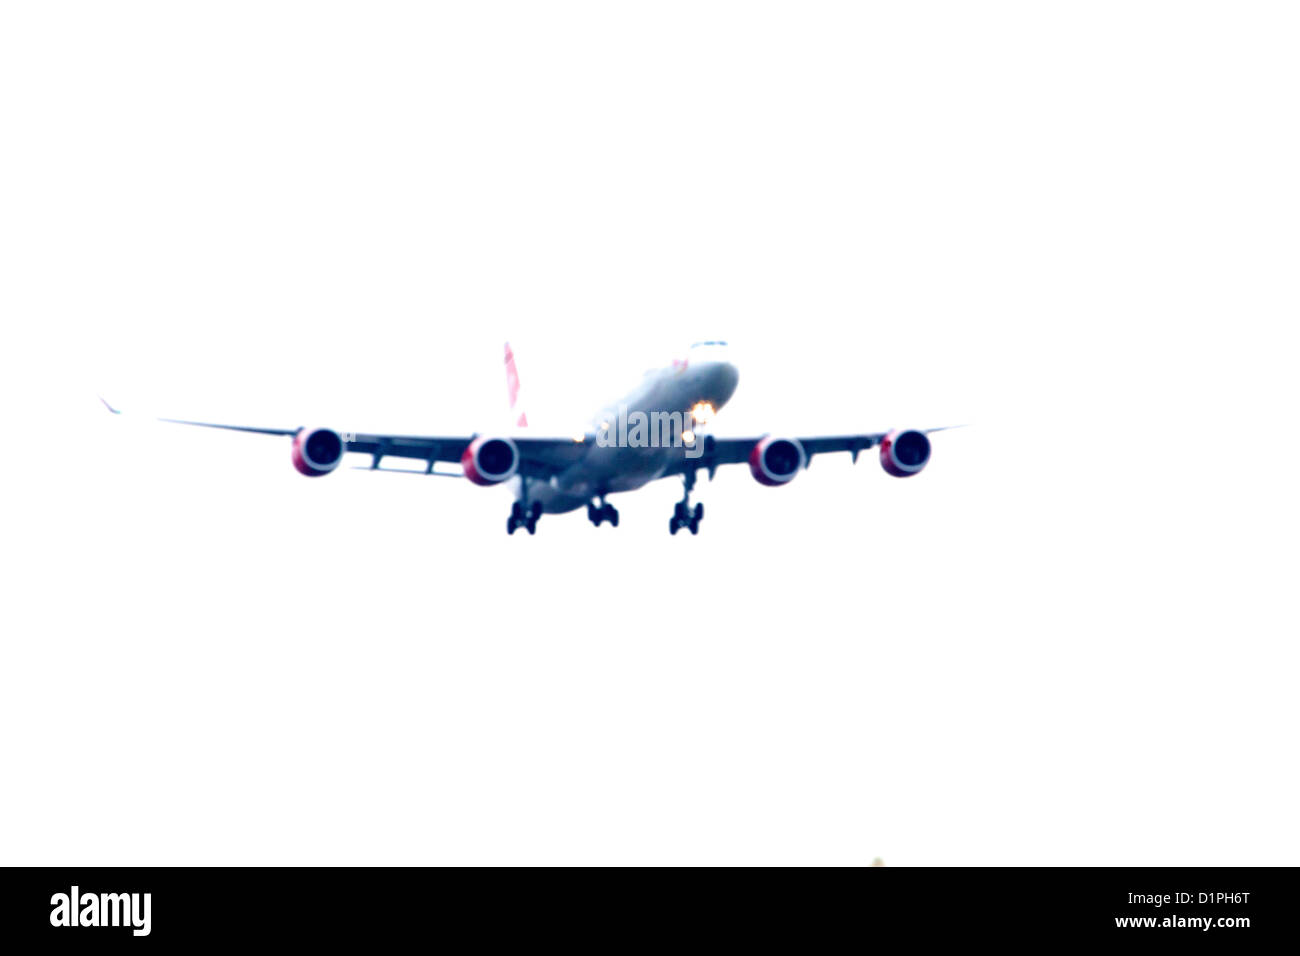 Virgin Airline airplane coming in to land at London Heathrow Airport Stock Photo